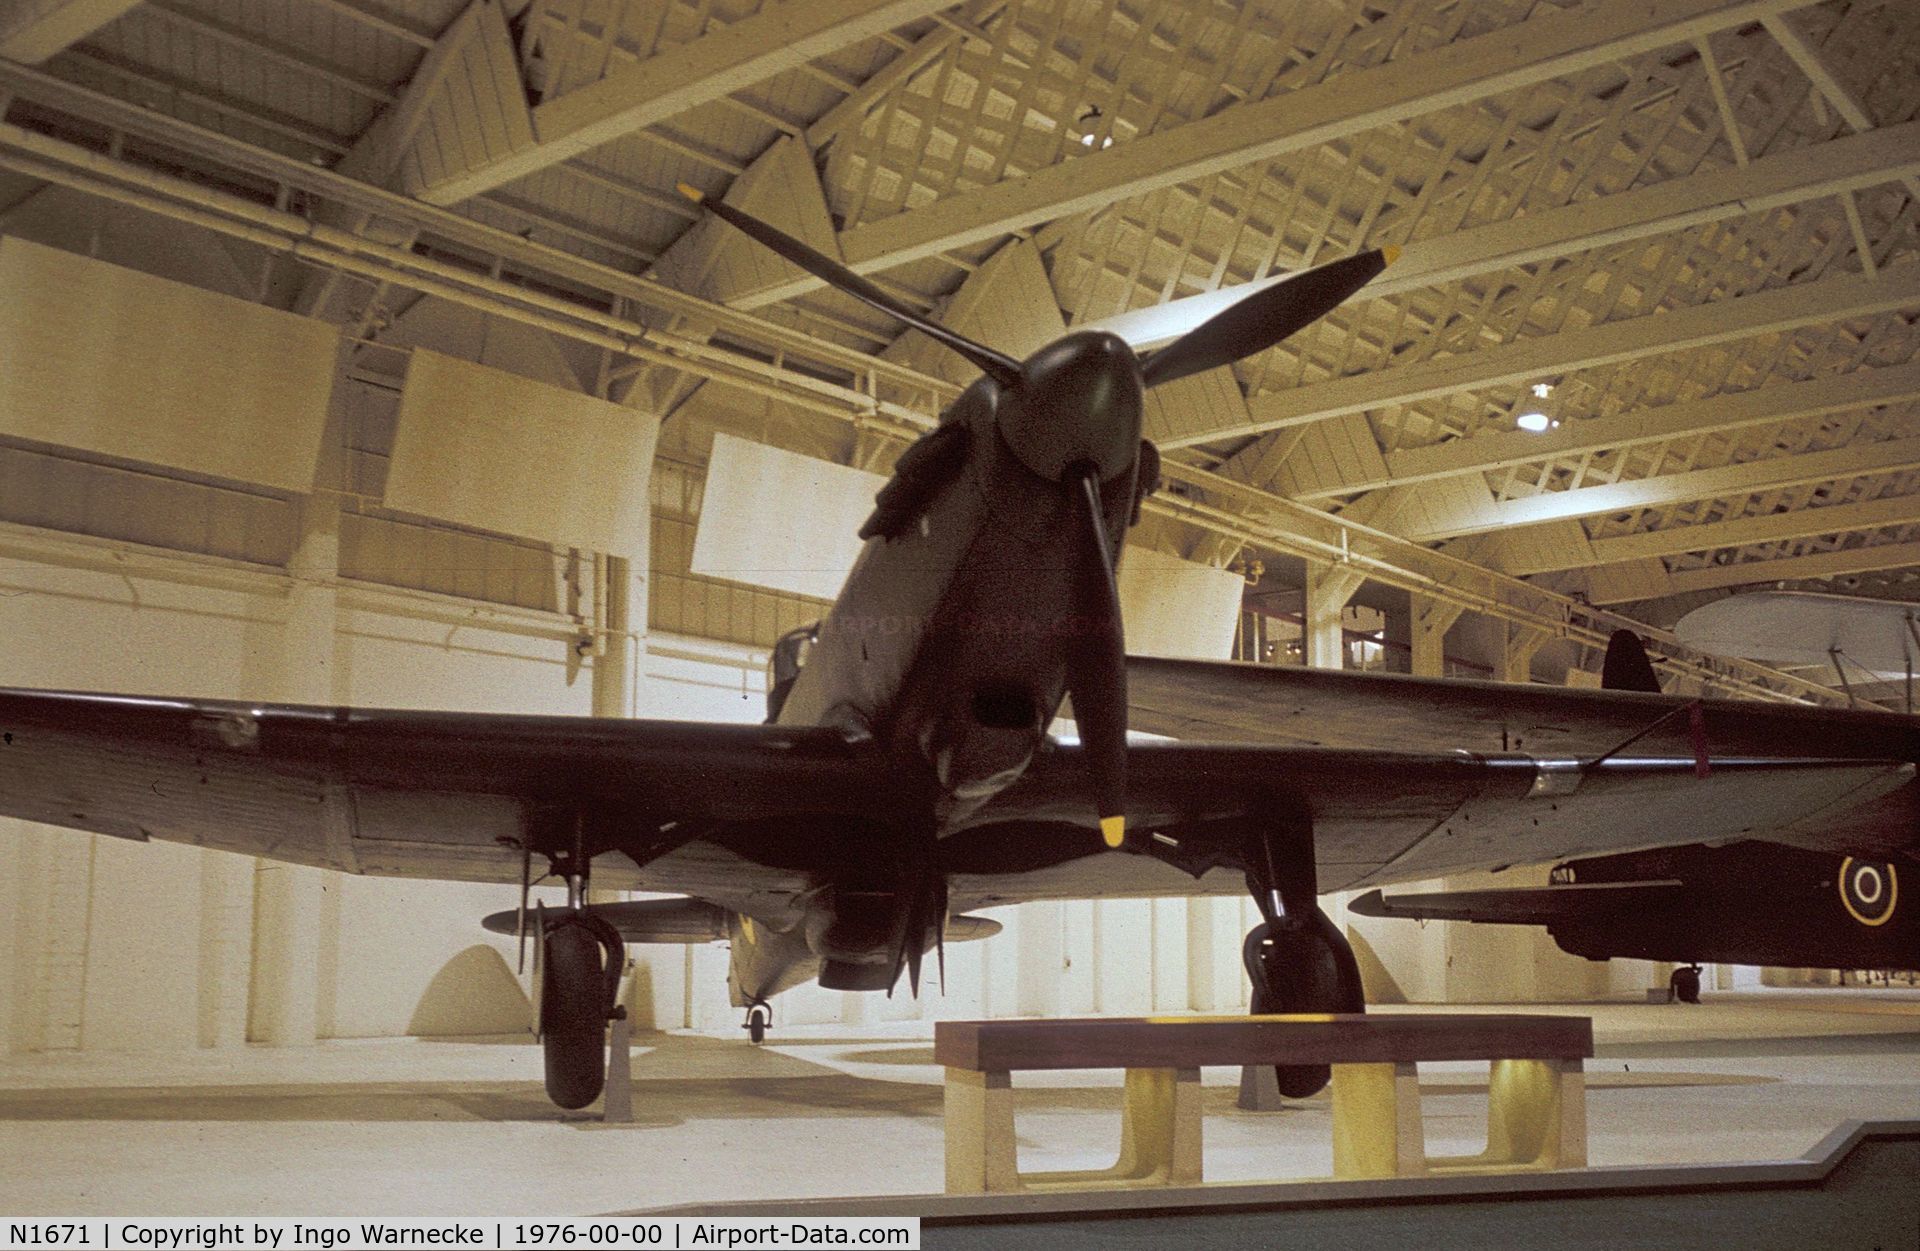 N1671, 1938 Boulton Paul Defiant I C/N Not found N1671, Boulton-Paul Defiant I at the Royal Air Force Museum, Hendon during the 'Wings of the Eagle' exhibition 1976